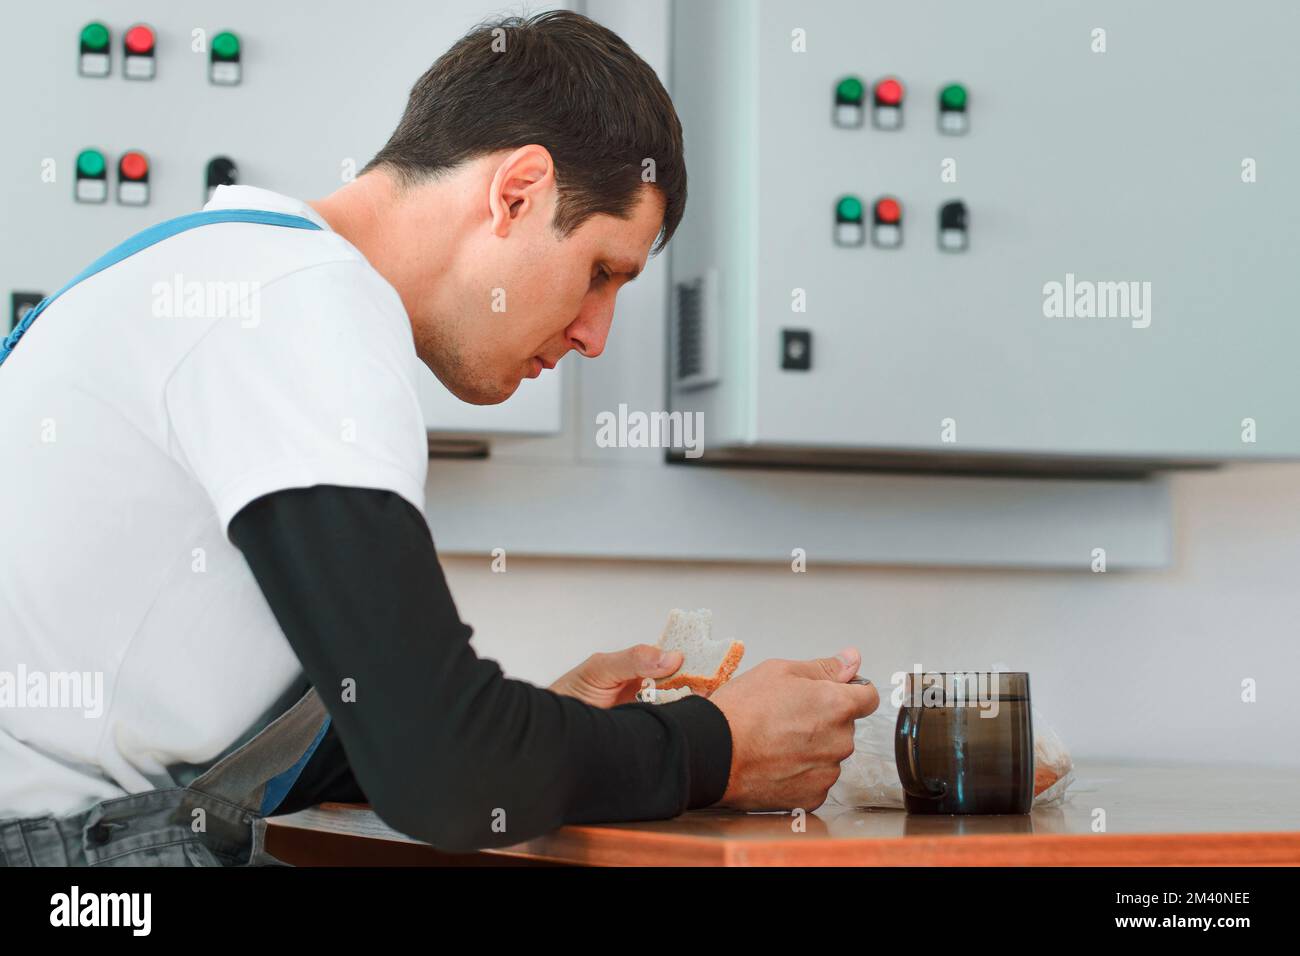 Lunch break. Eating in workplace during work. Caucasian man in work suit sits at table in production hall and eats from container. Worker has lunch in break room.. Stock Photo